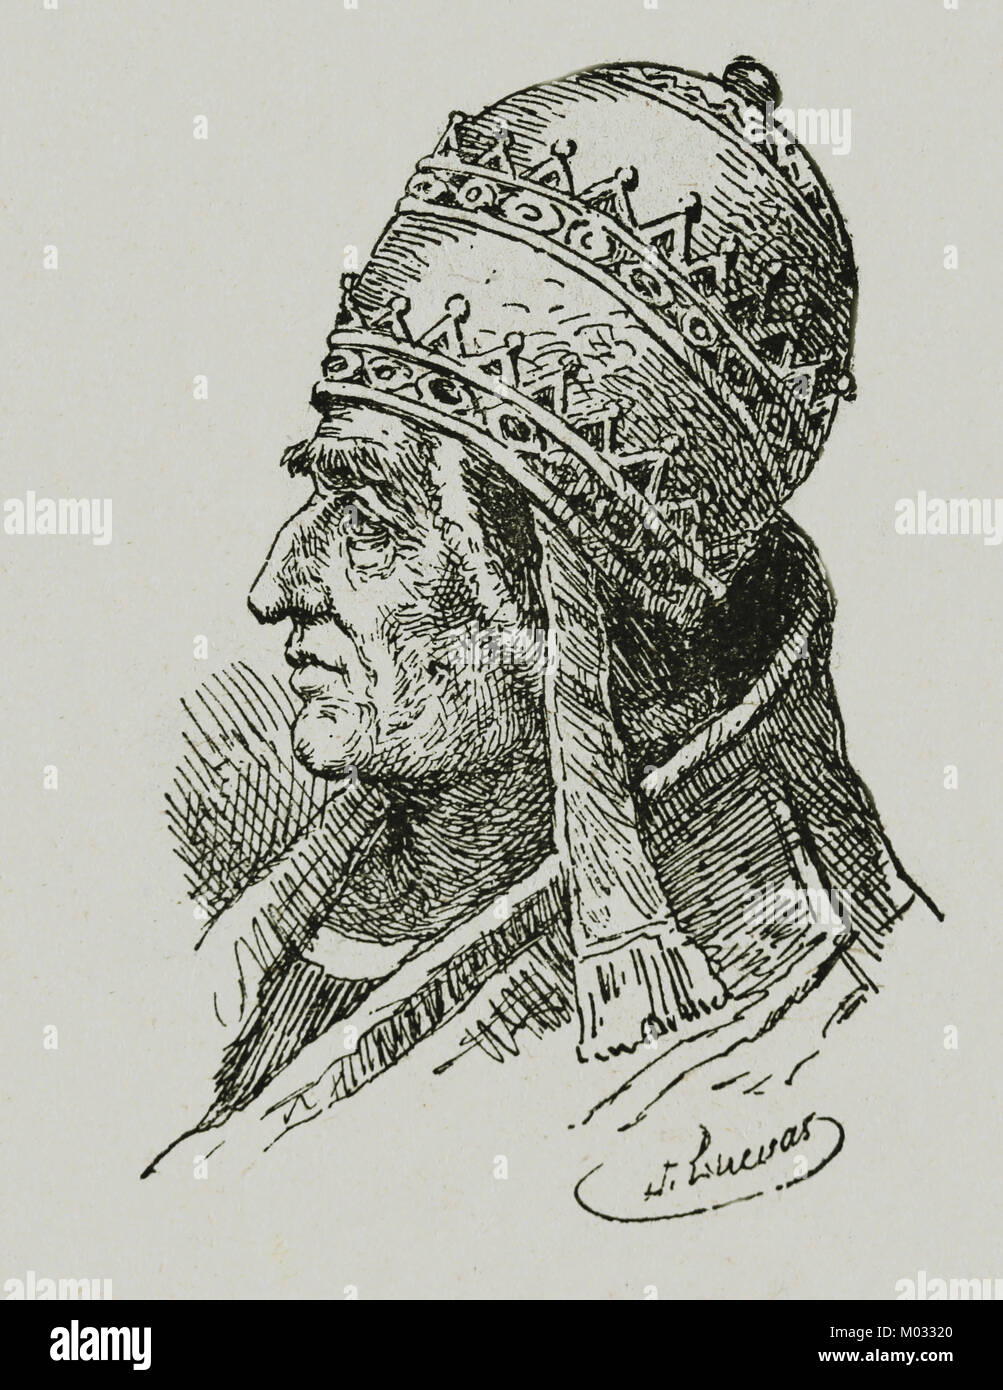 Pope Gregory XIII (1502-1585). Engraving, Stock Photo